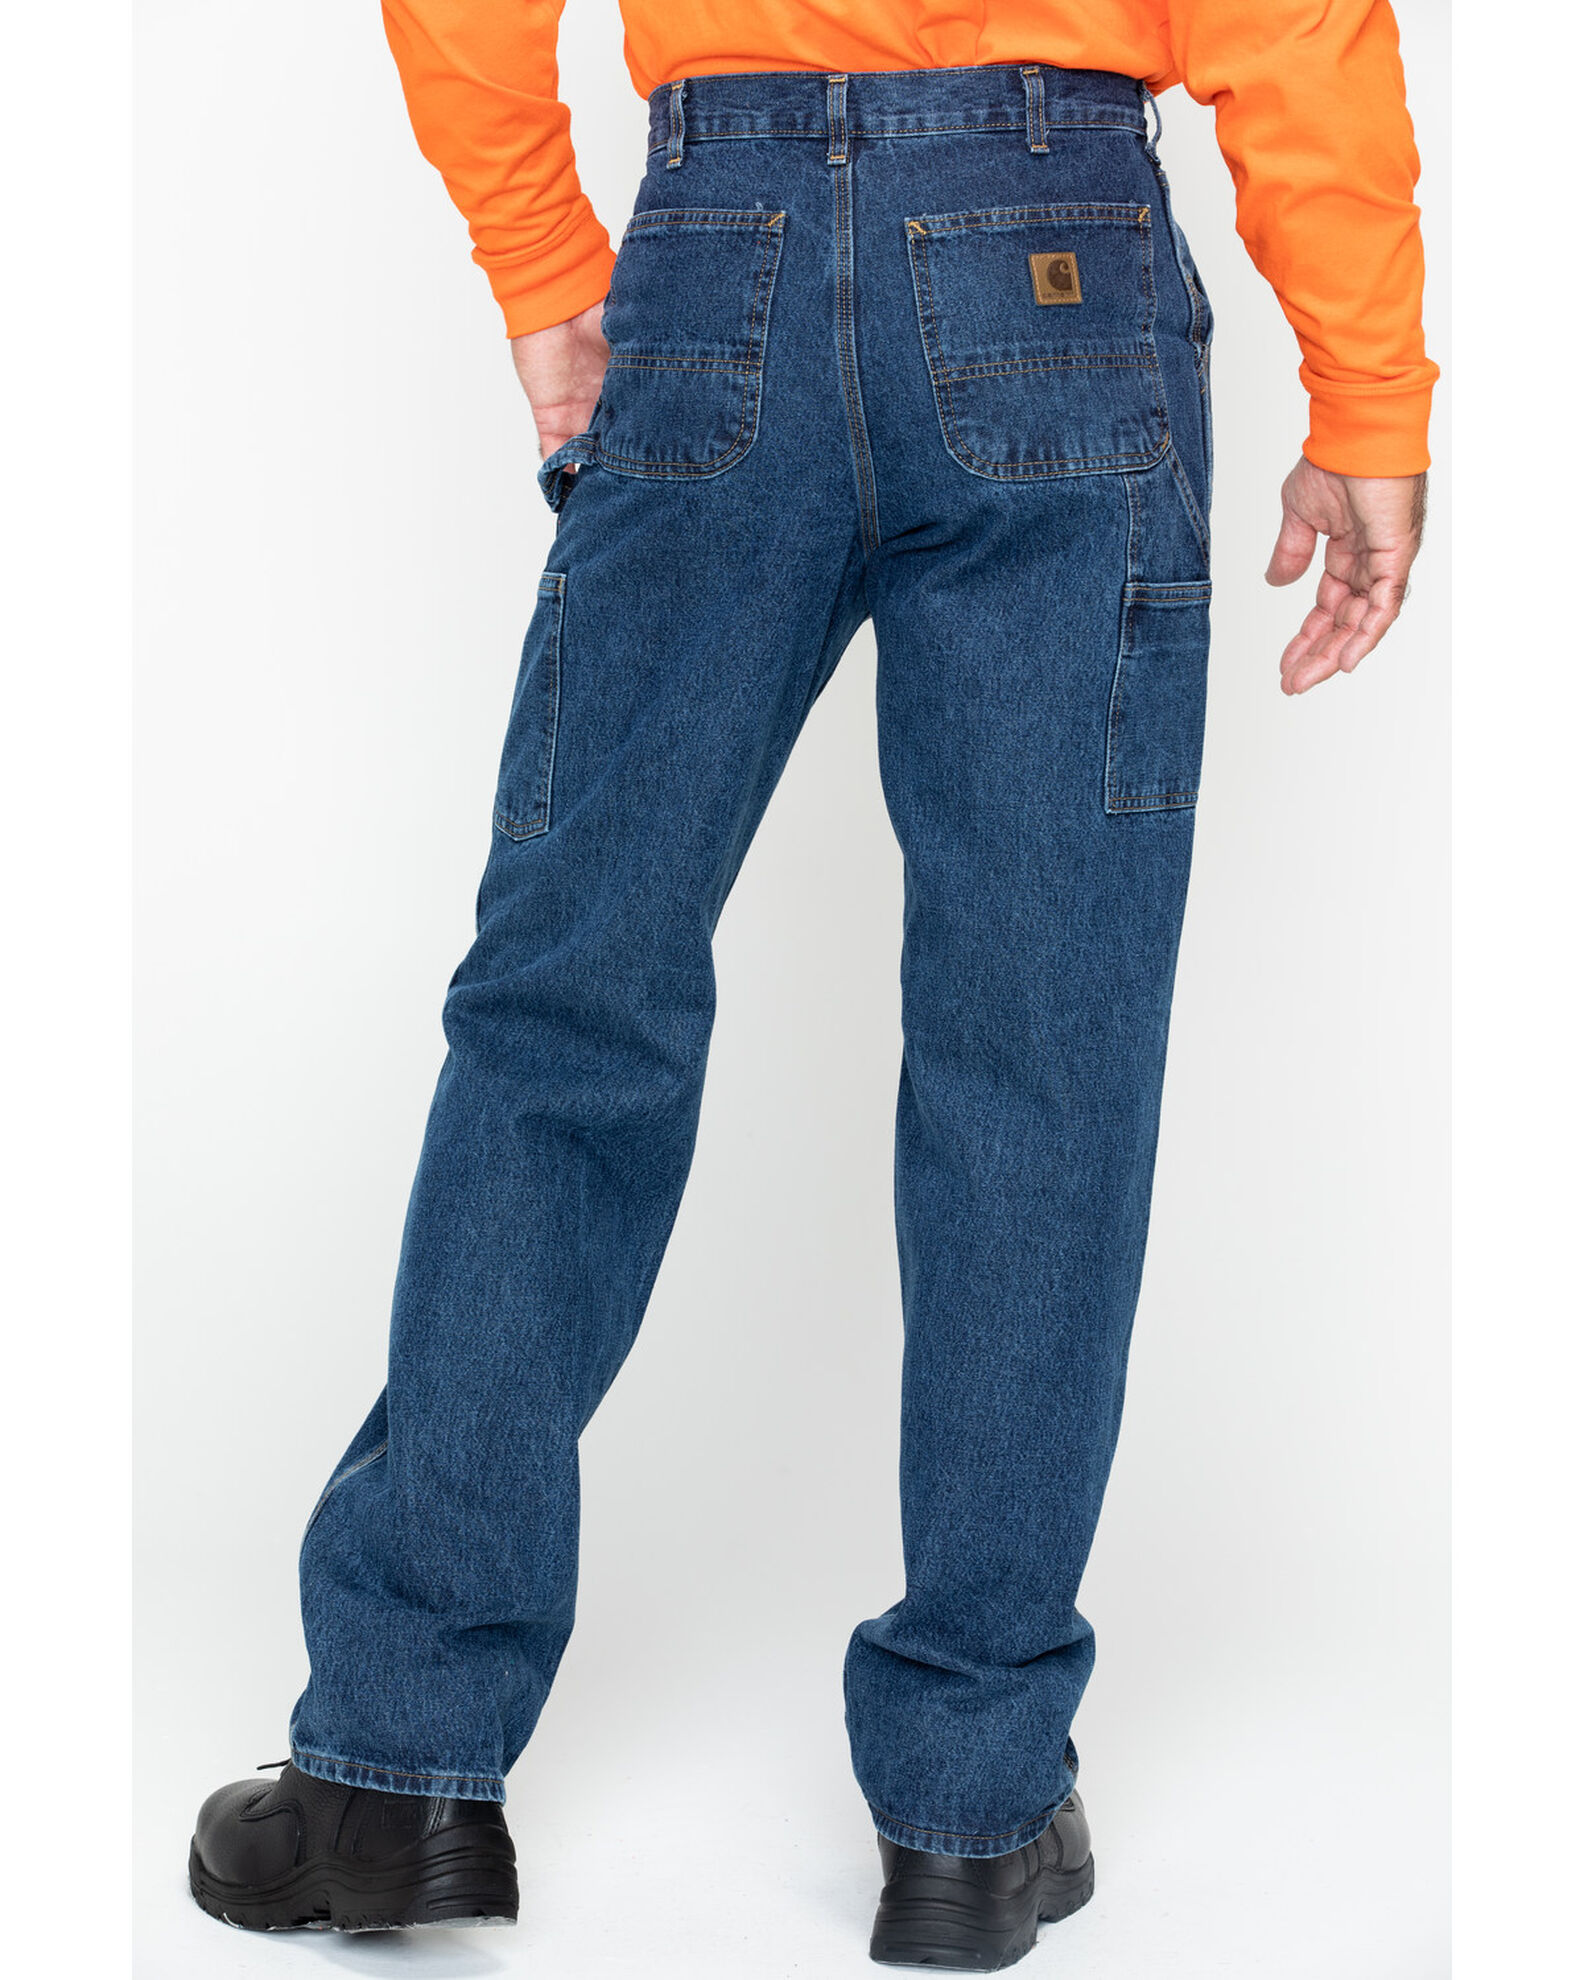 Carhartt Jeans - Dungaree Fit Work | Boot Barn